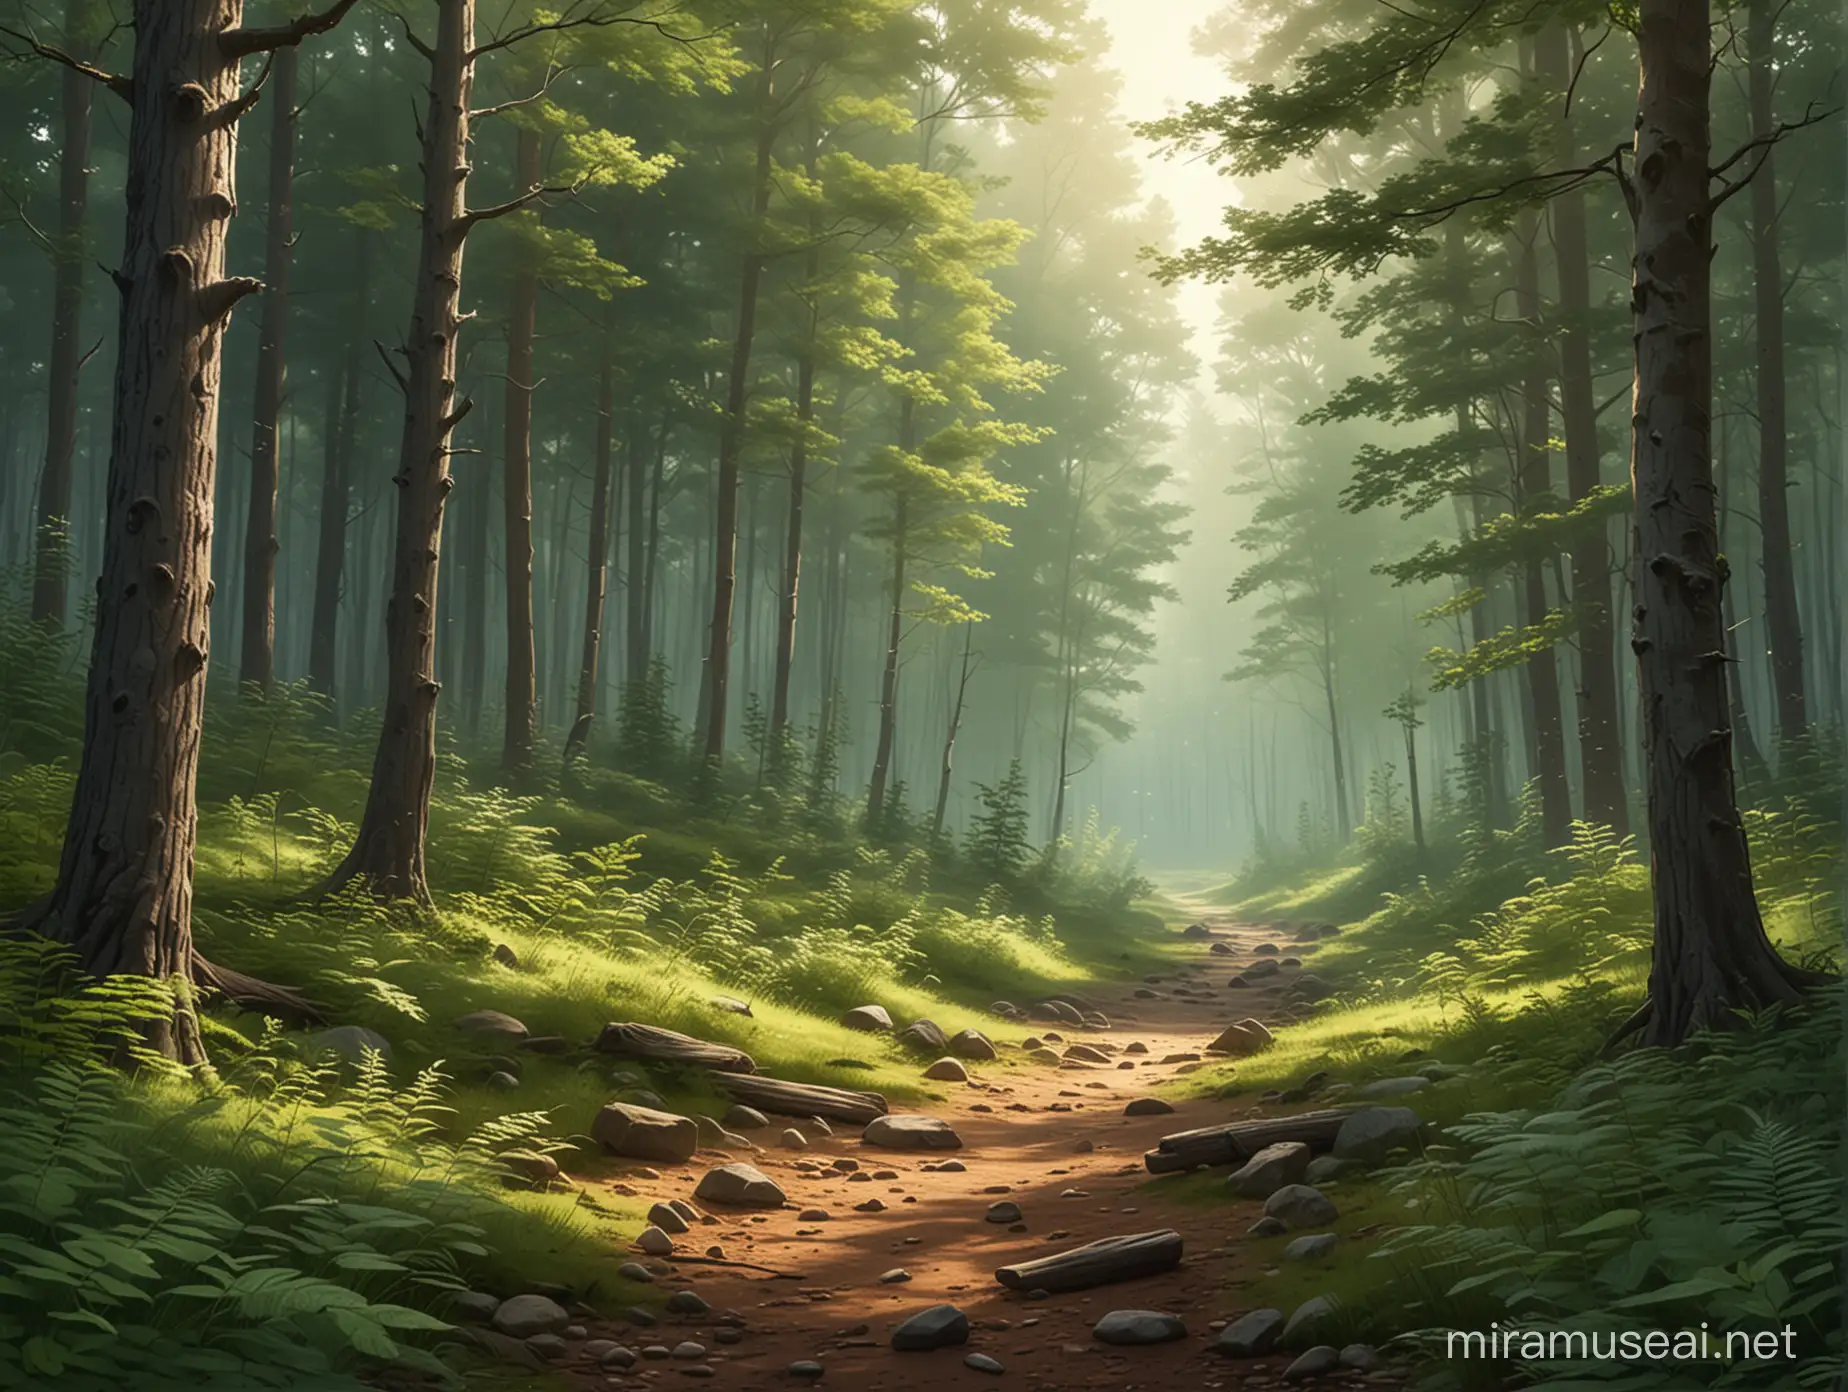 Tranquil Forest Landscape Serene Nature Scene with Calming Ambiance